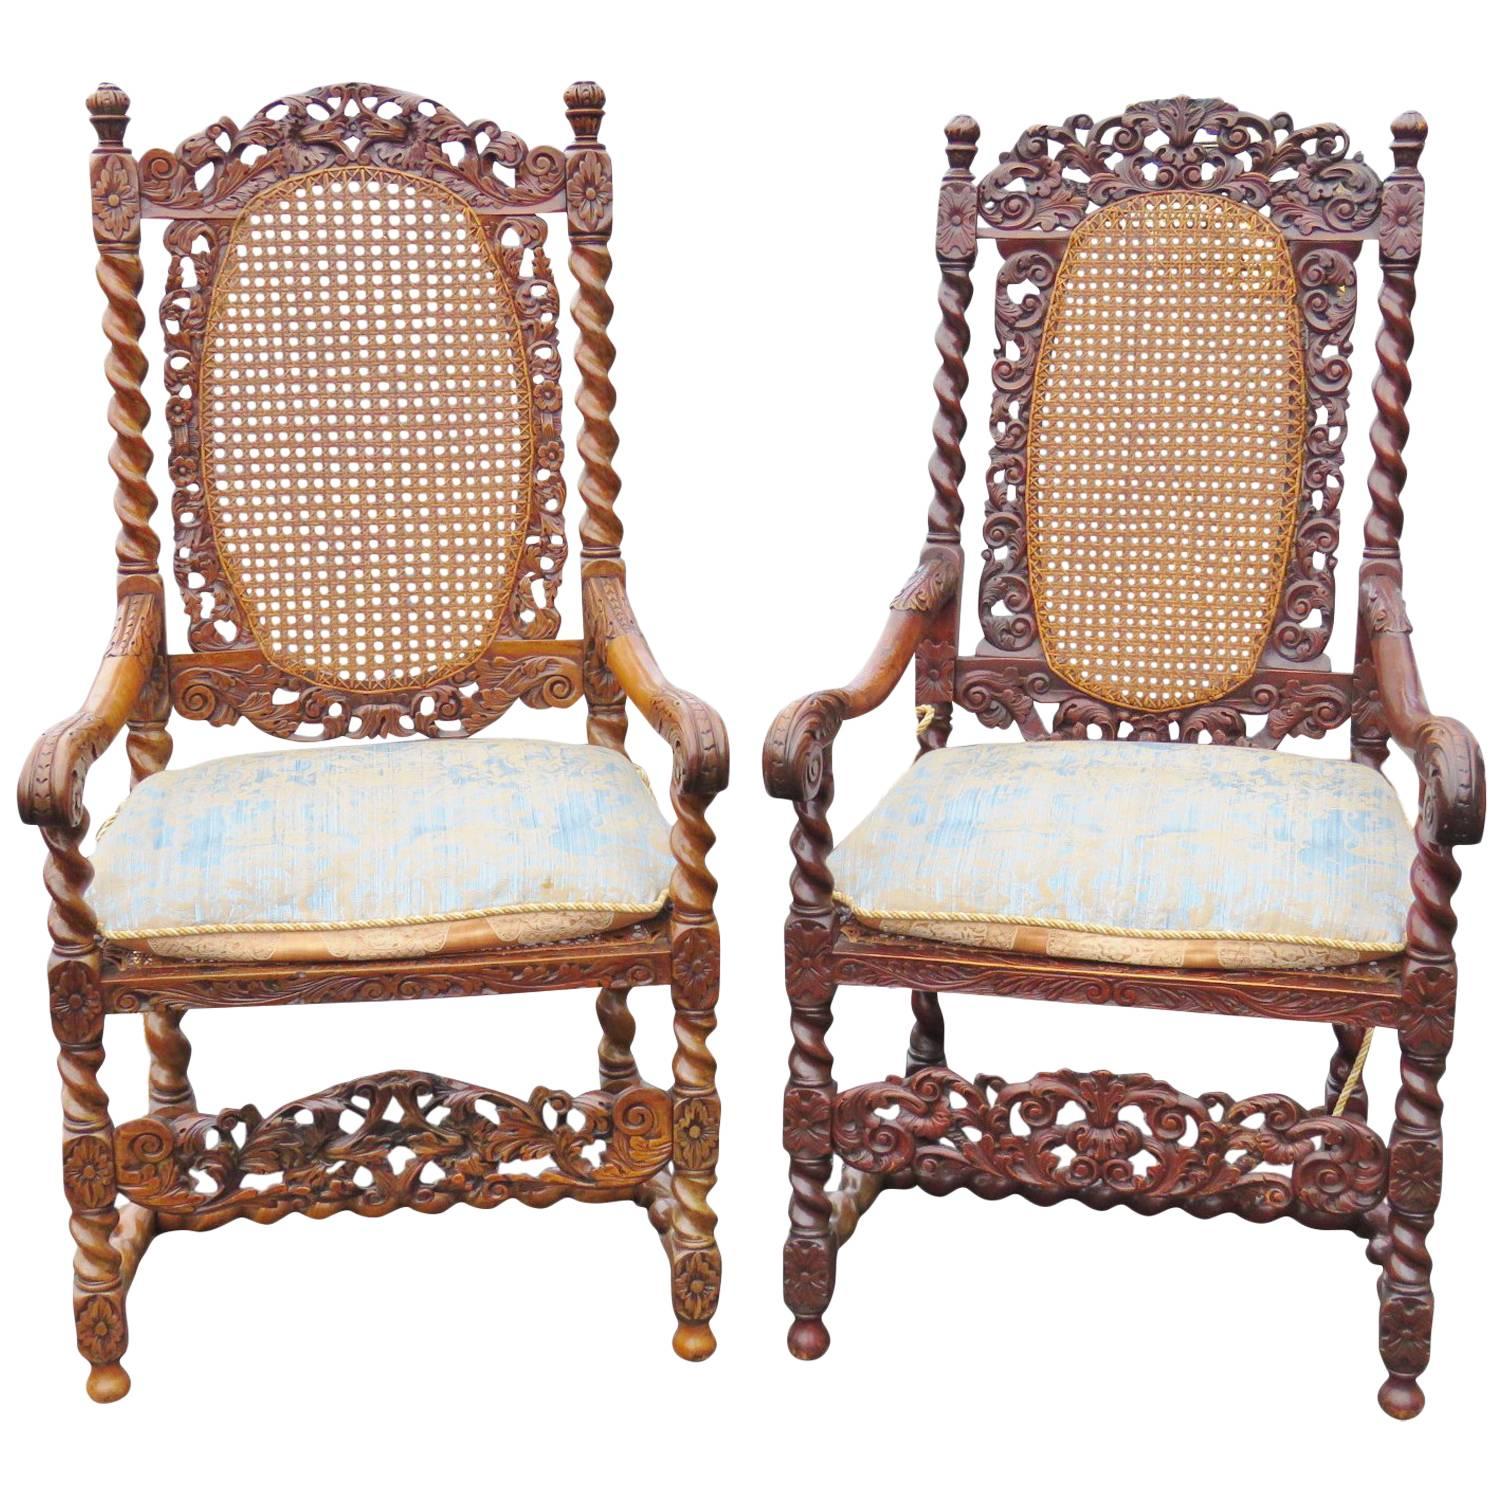 Pair of Barley Twist Caned Throne Chairs